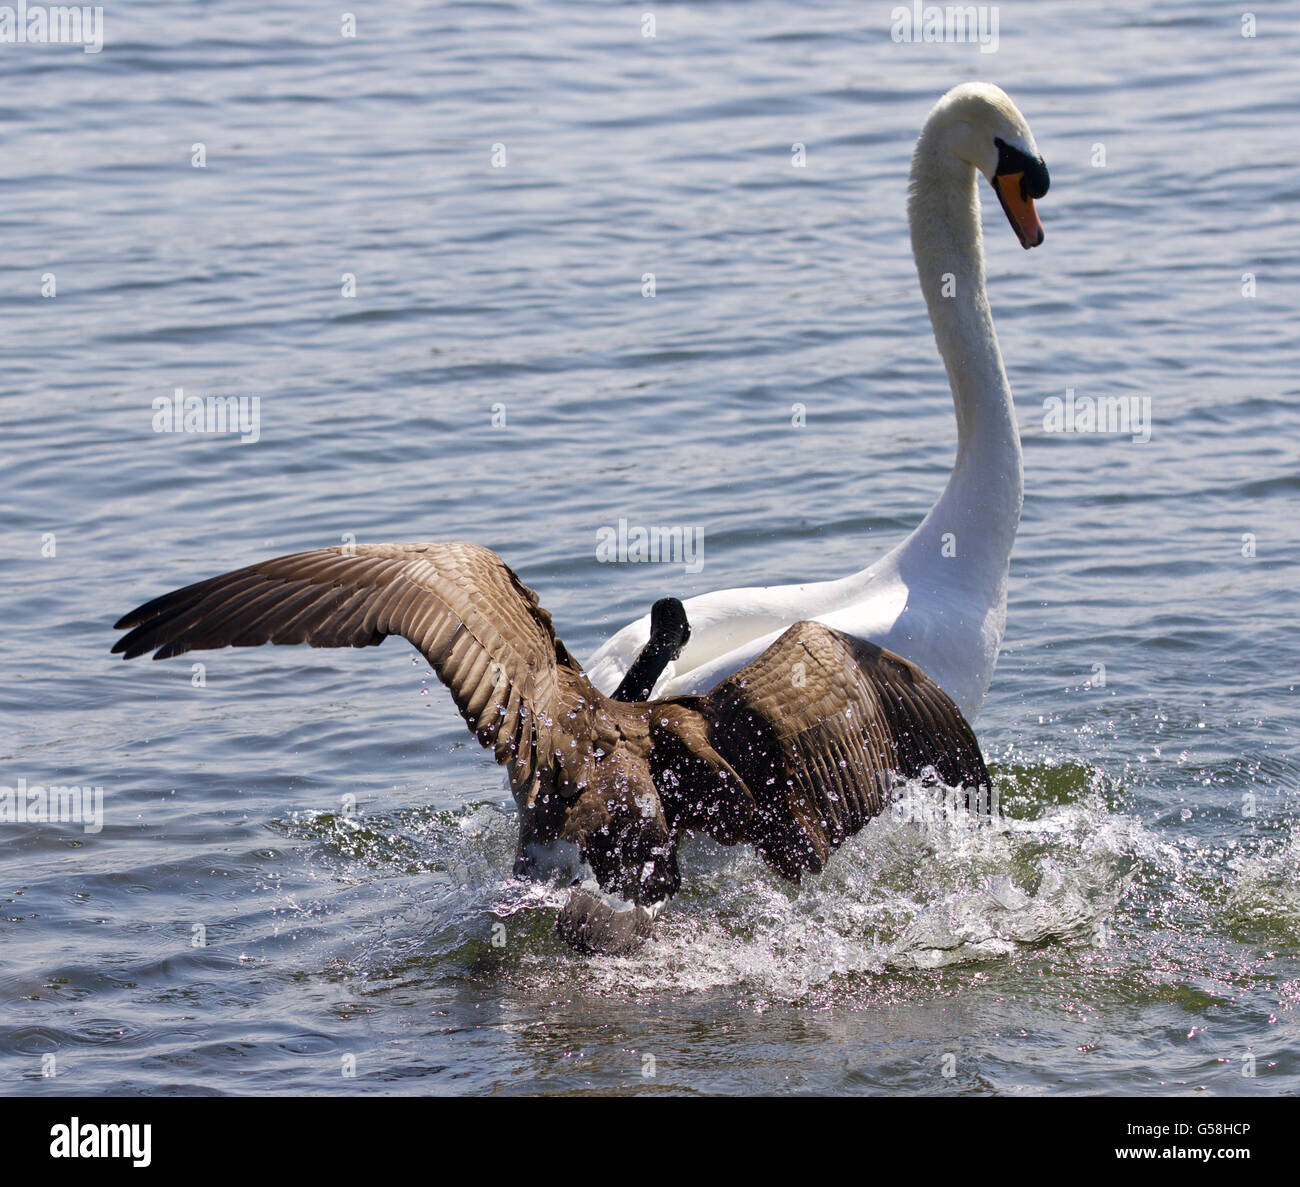 Amazing picture with the Canada goose attacking the swan on the lake Stock Photo